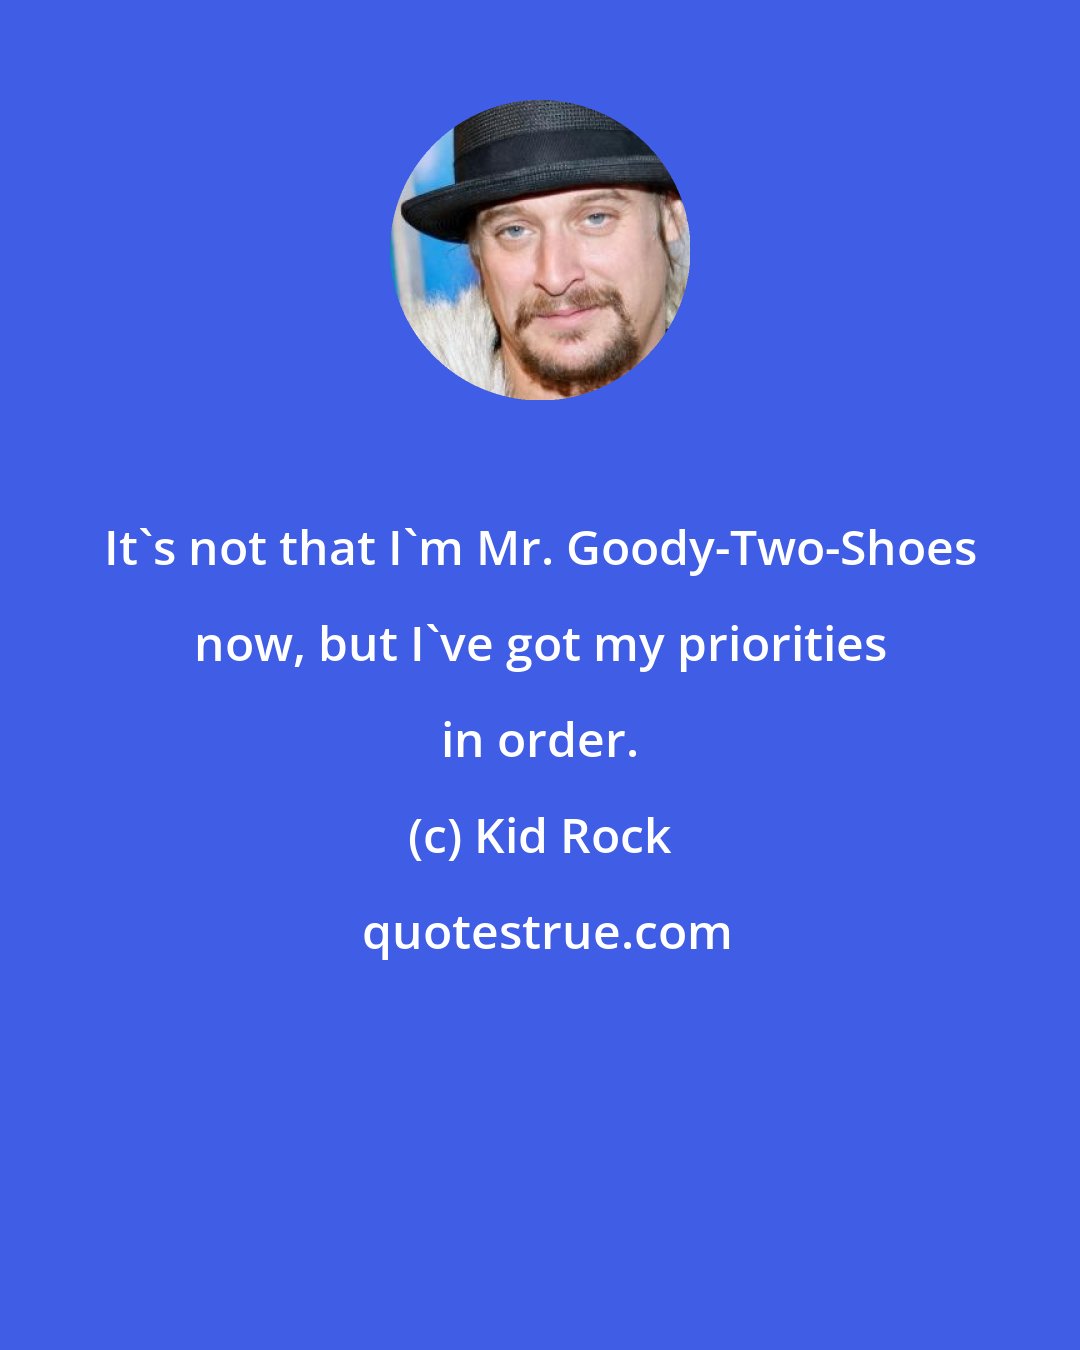 Kid Rock: It's not that I'm Mr. Goody-Two-Shoes now, but I've got my priorities in order.